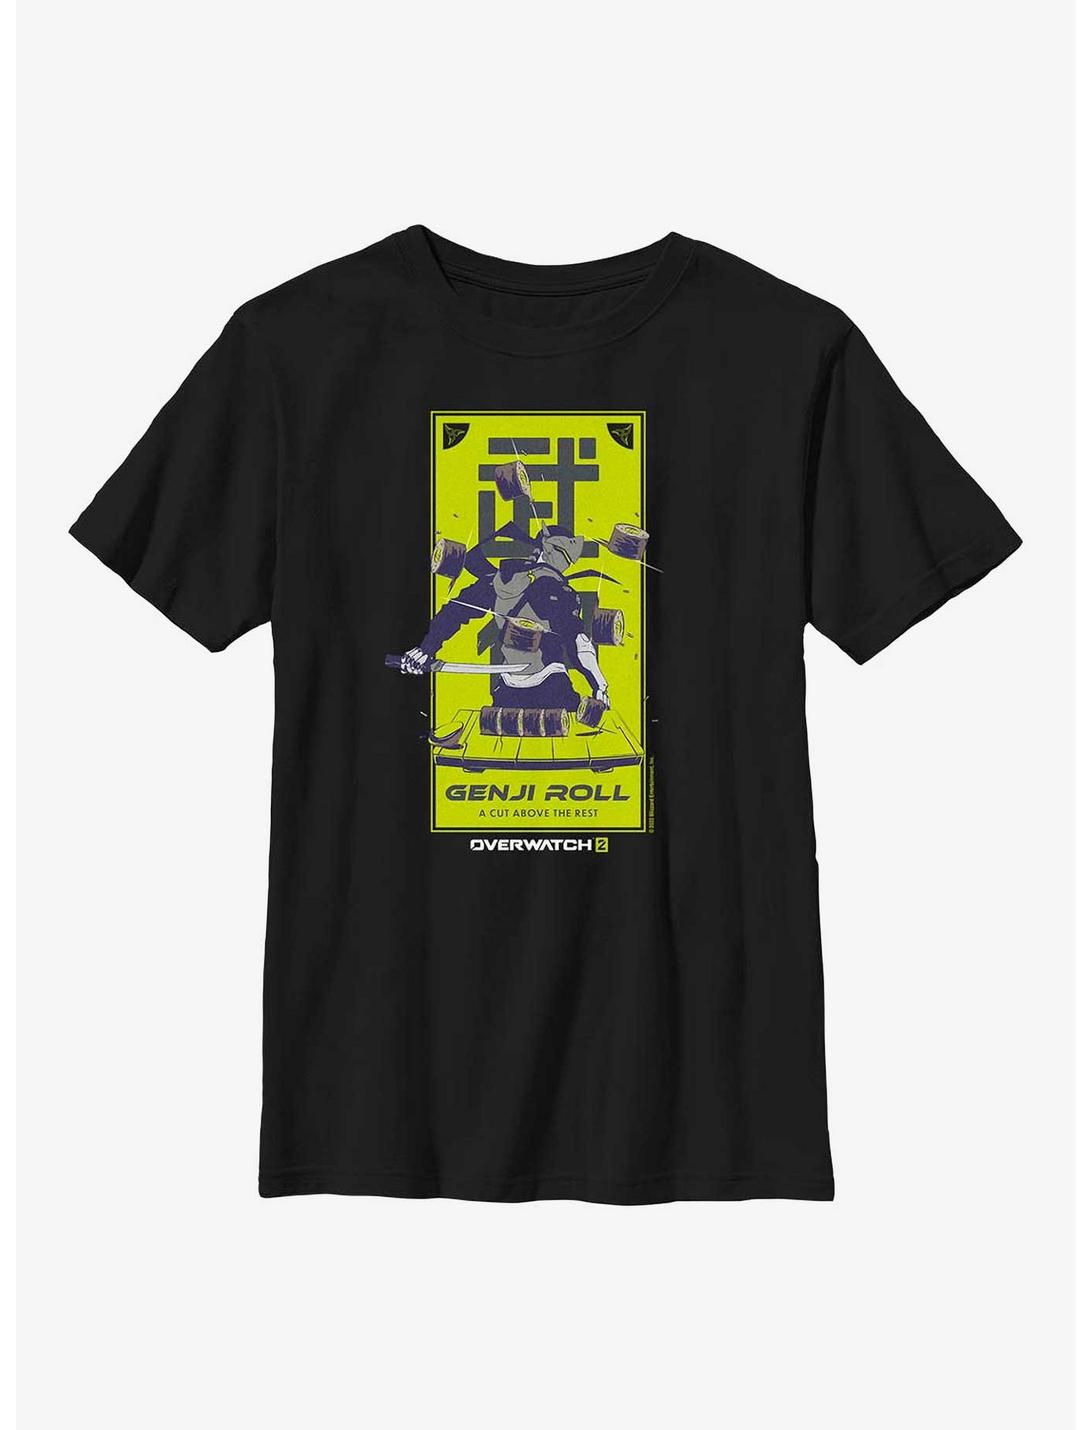 Overwatch 2 Genji Roll Poster Youth T-Shirt, BLACK, hi-res